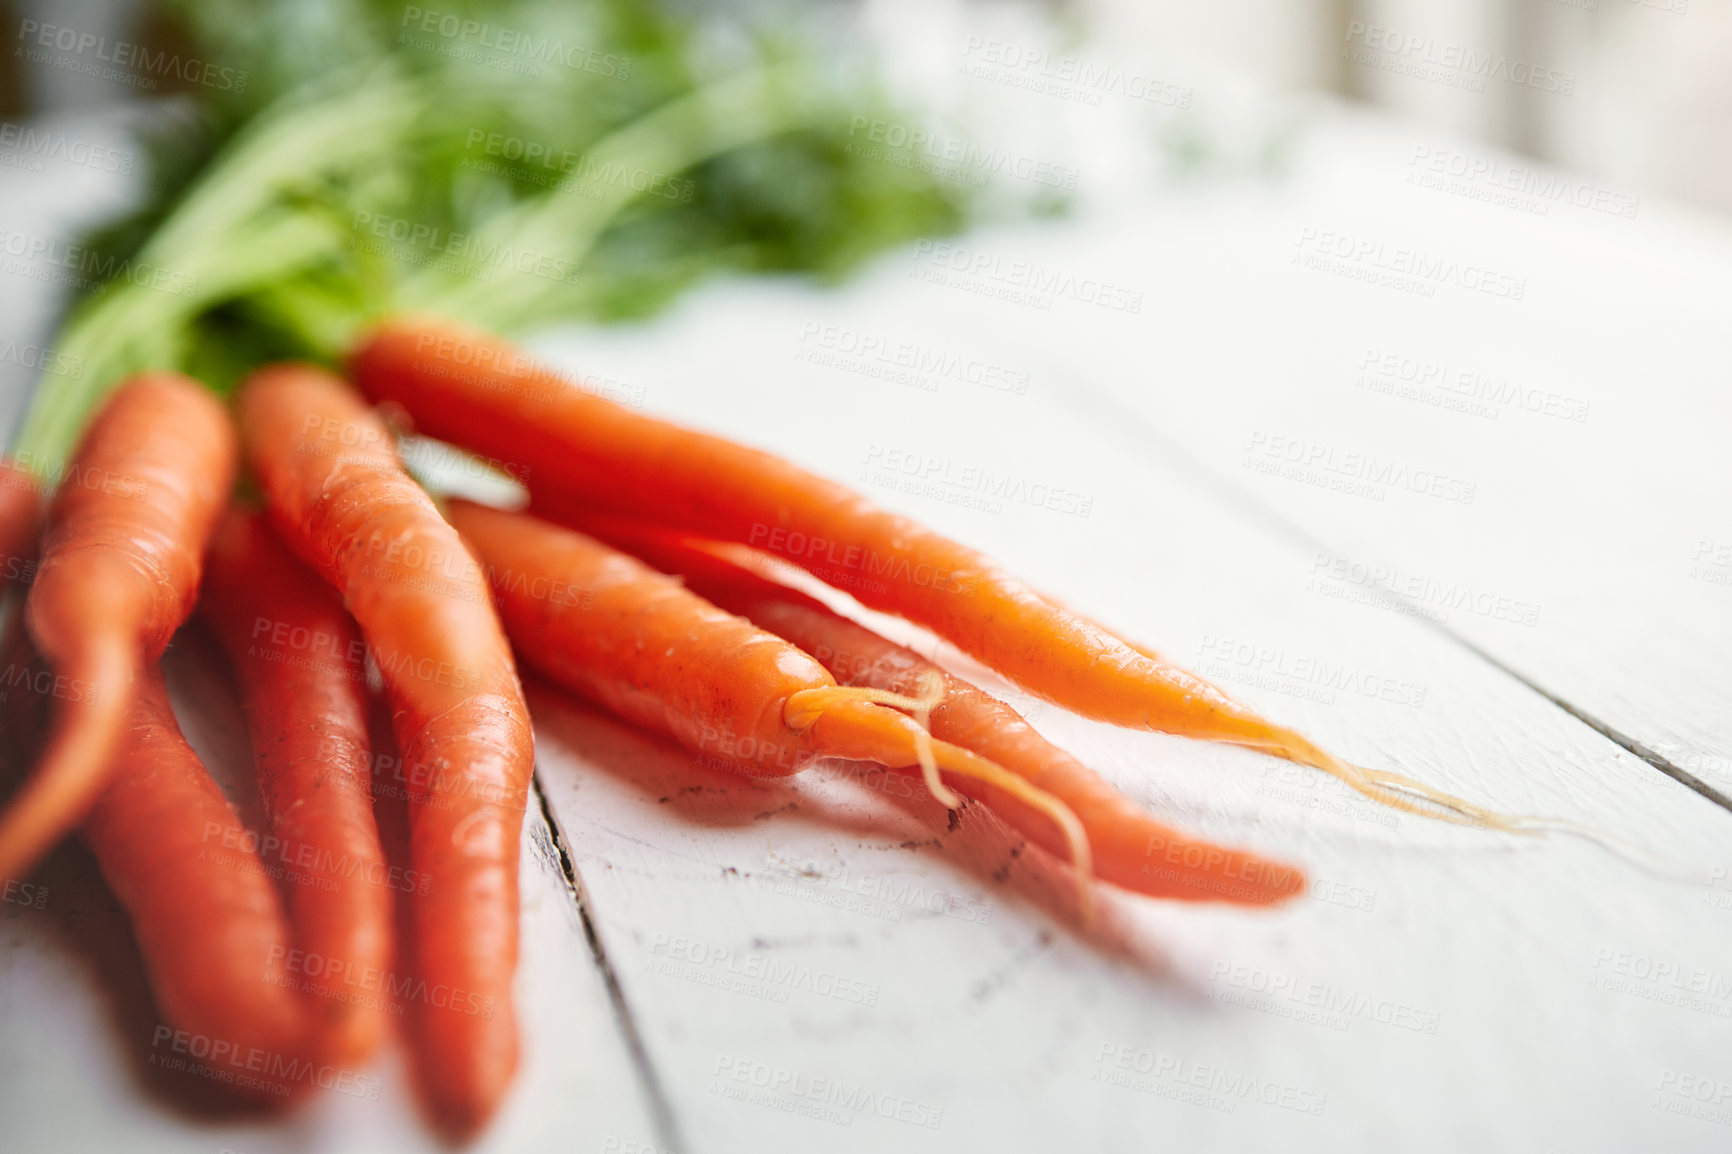 Buy stock photo Shot of a bunch of fresh carrots on a table